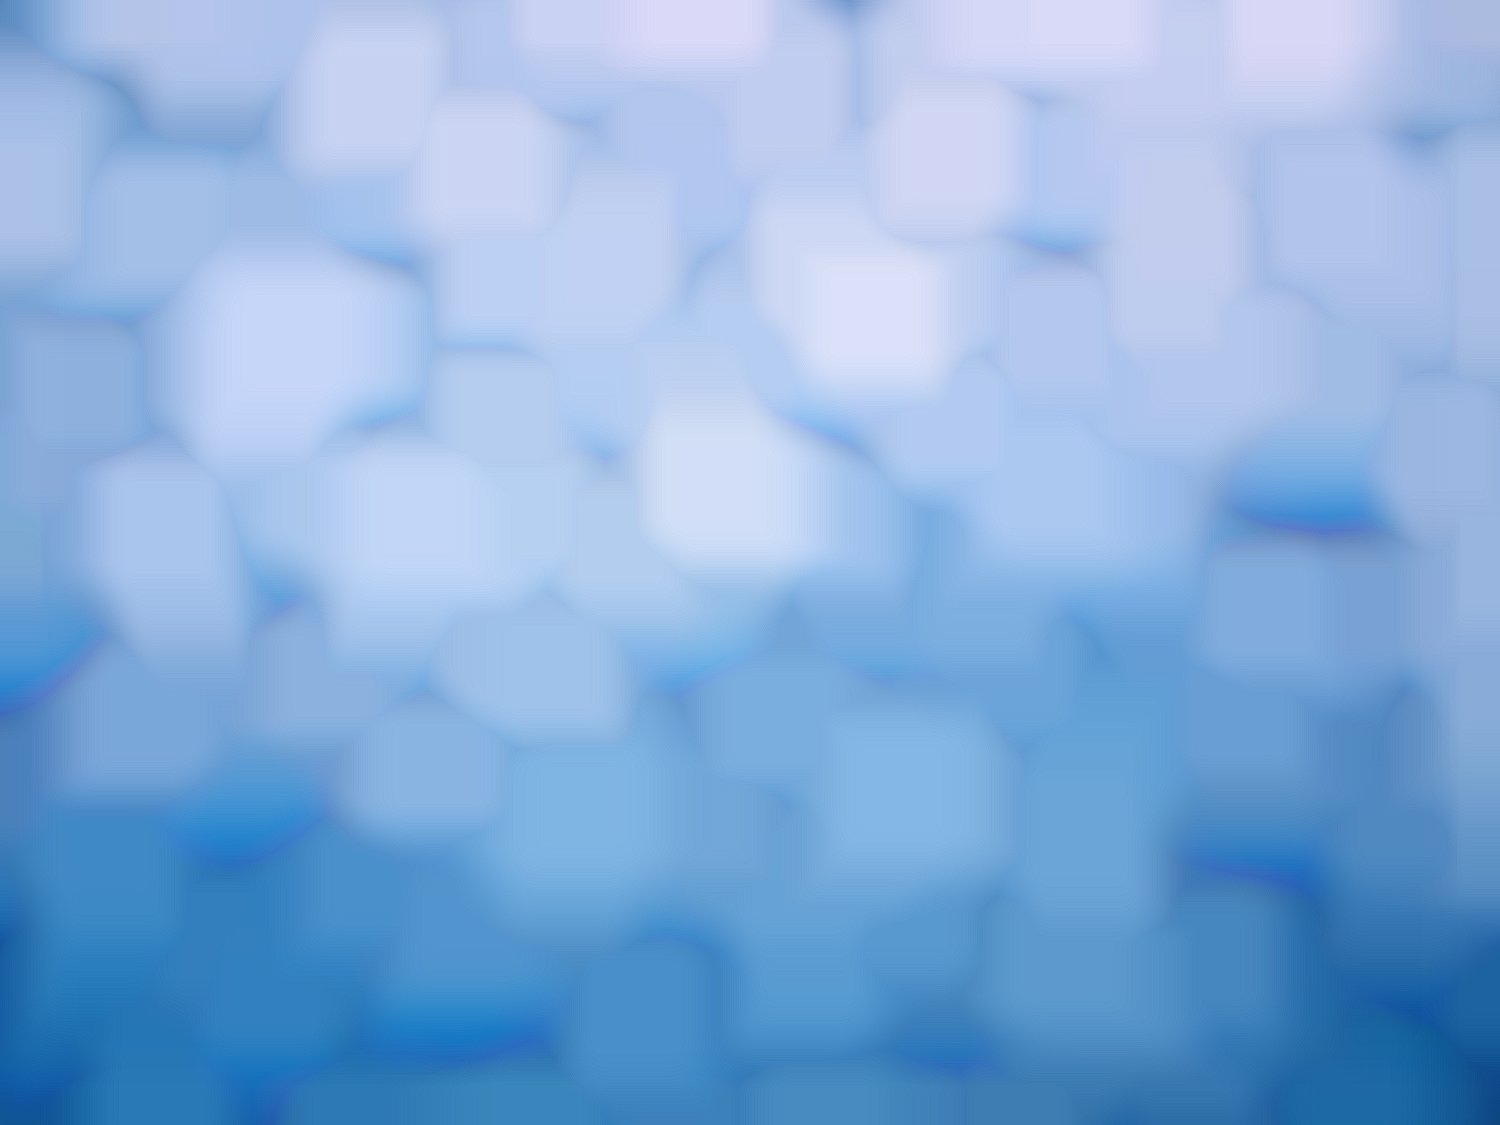 abstract blue and white squares pattern in the background